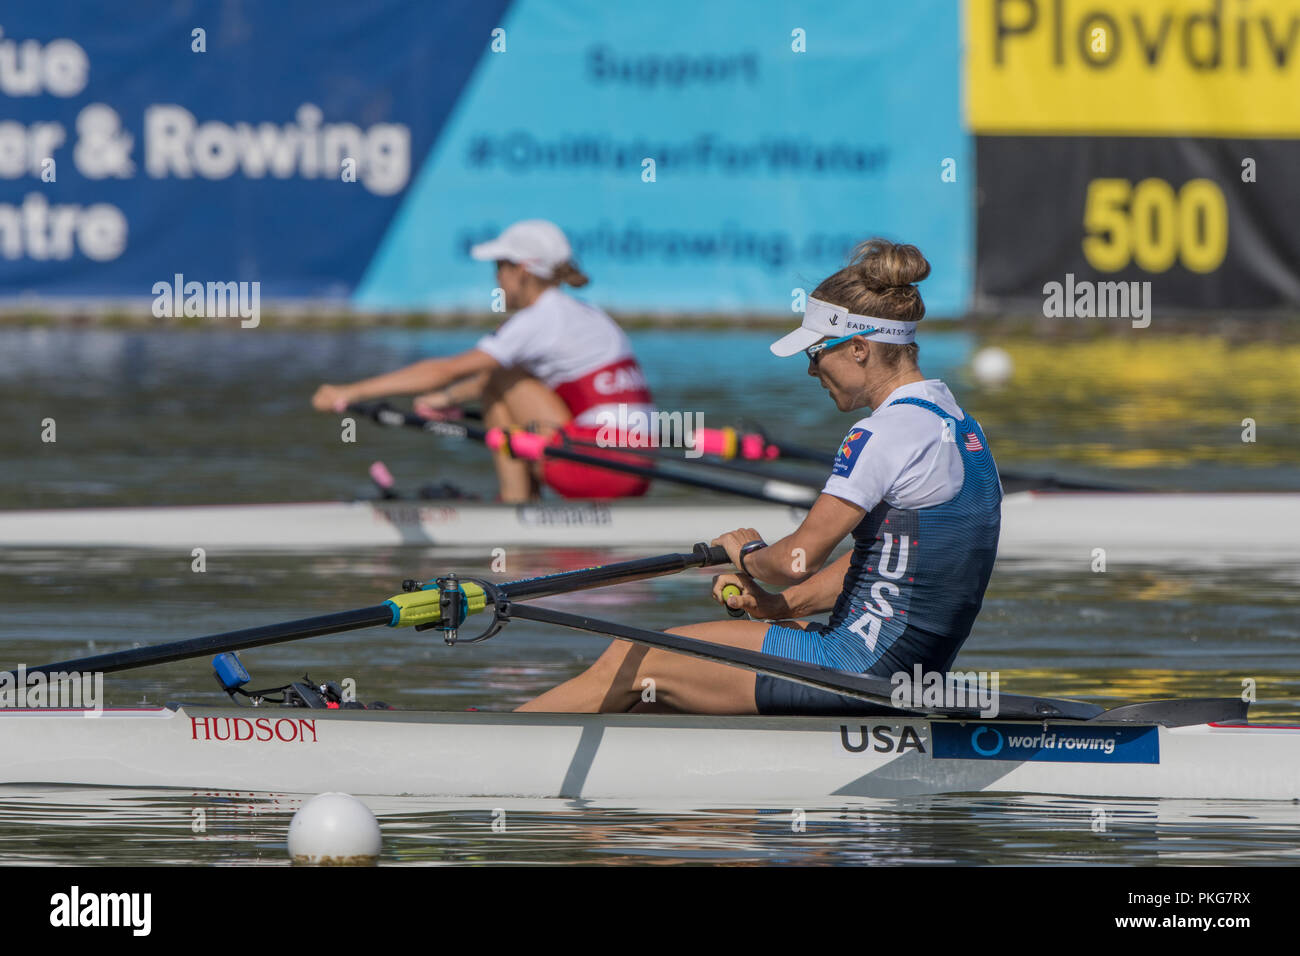 Plovdiv, Bulgaria, Thursday, 13th September 2018, USA., LW1X, Michelle SECHSER, competing in the Semi Final A/B's, Lightweight Women's Single Sculls, at the FISA, World Rowing Championships, © Peter SPURRIER, Stock Photo